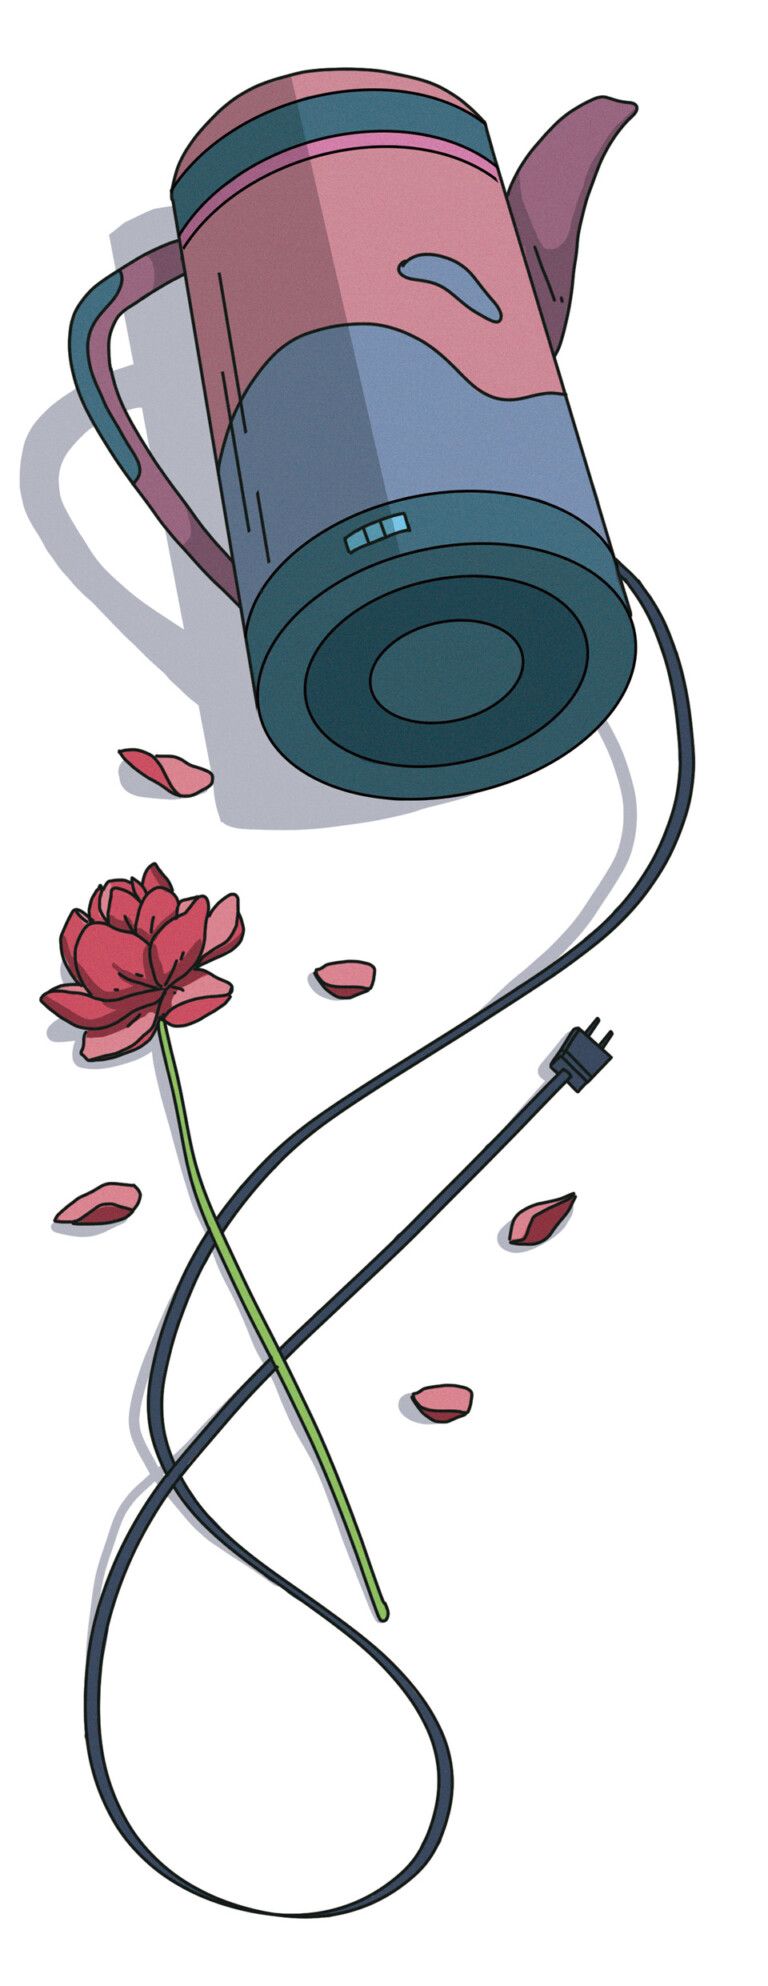 A kettle and rose with petals laying around